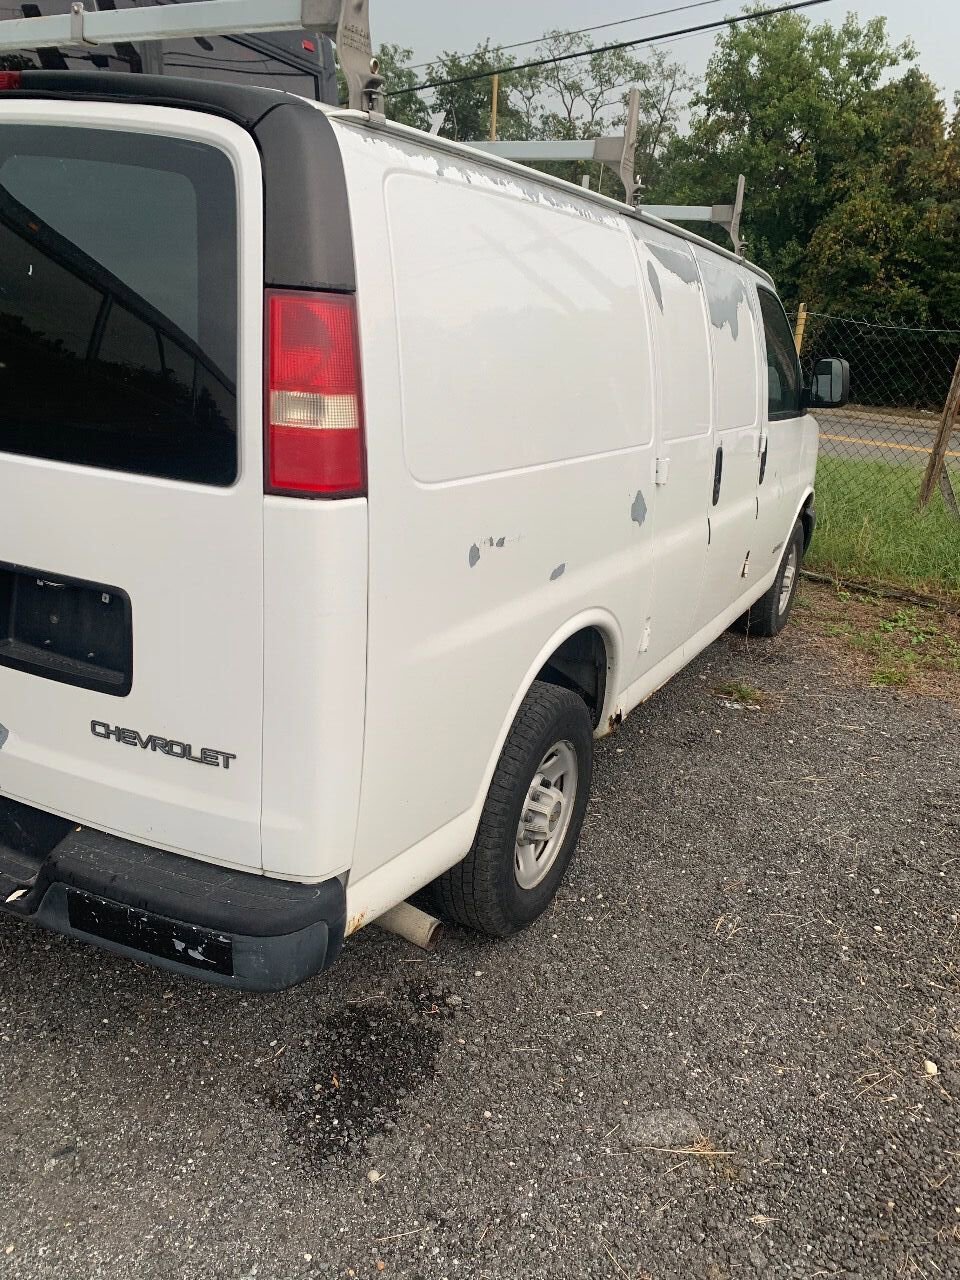 Used 2003 Chevrolet Express 2500 for Sale Right Now - Autotrader